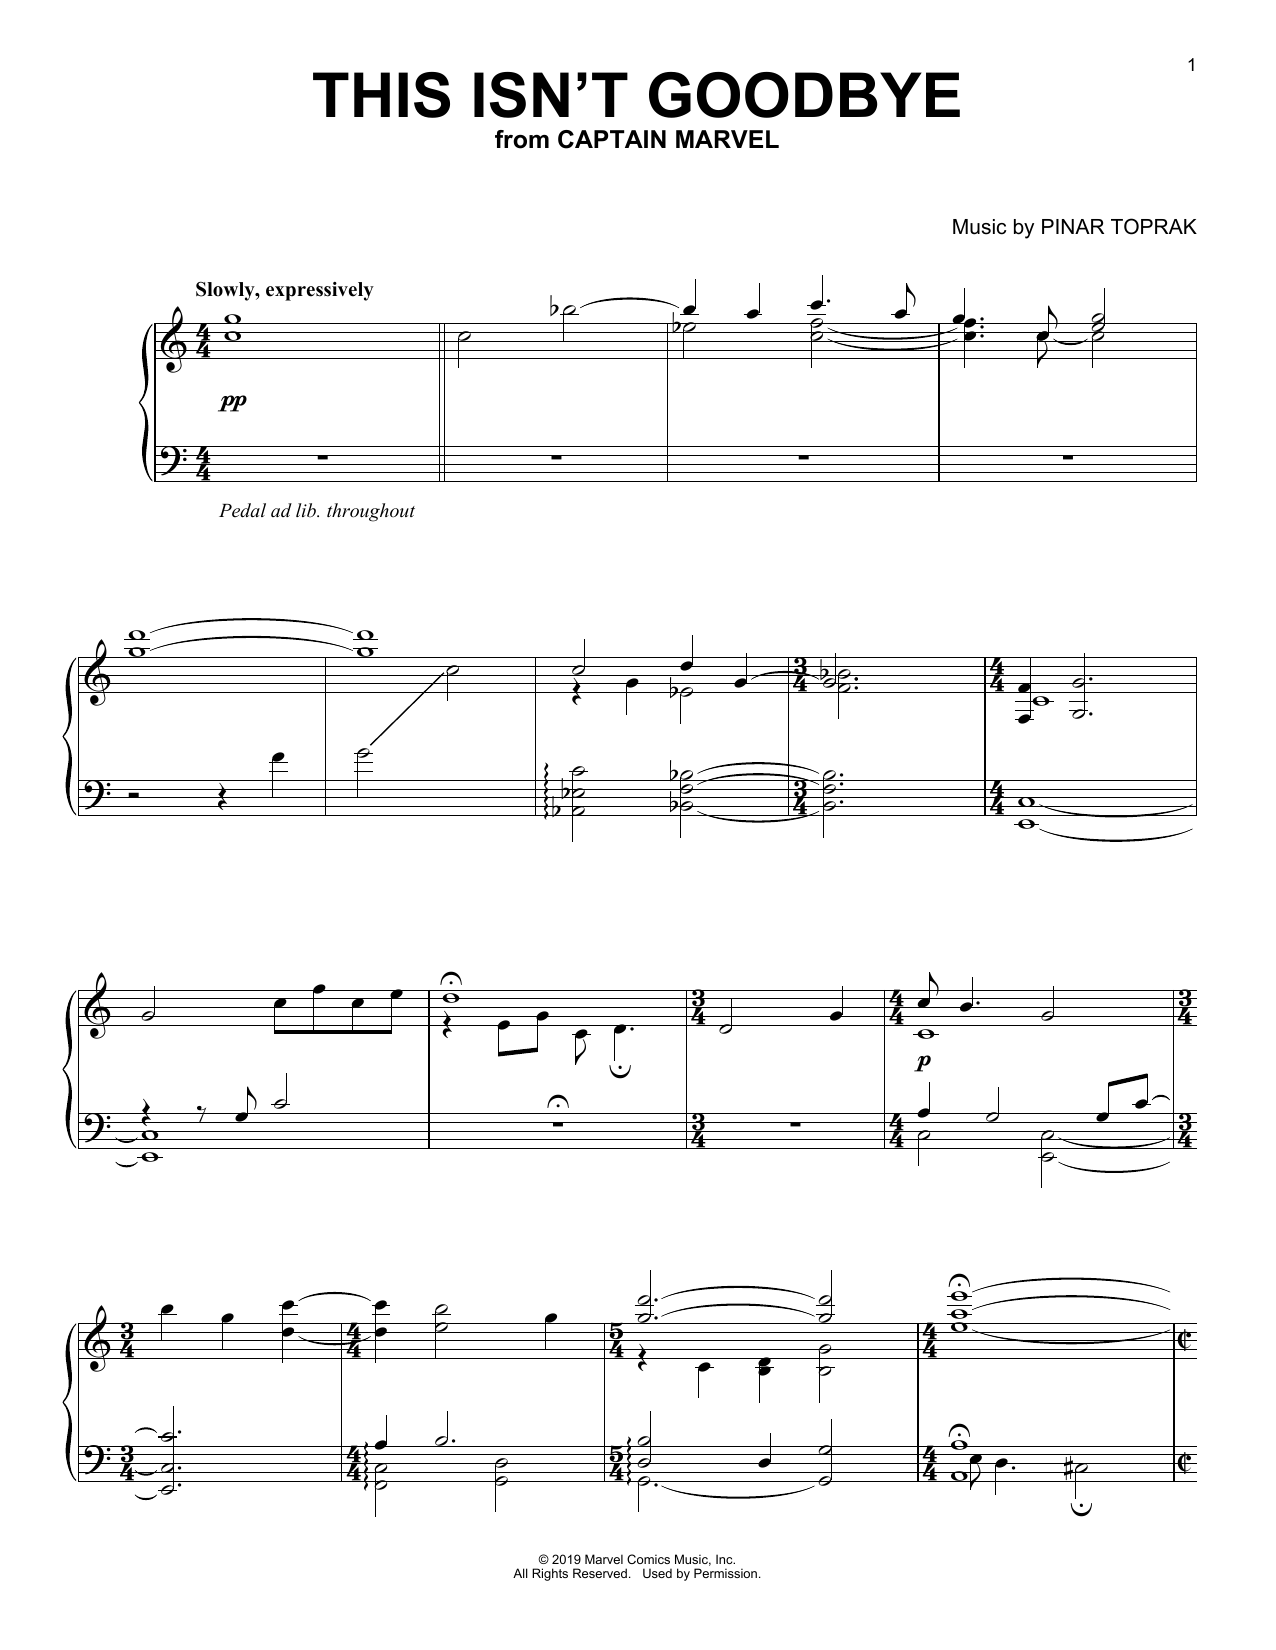 Download Pinar Toprak This Isn't Goodbye (from Captain Marvel Sheet Music